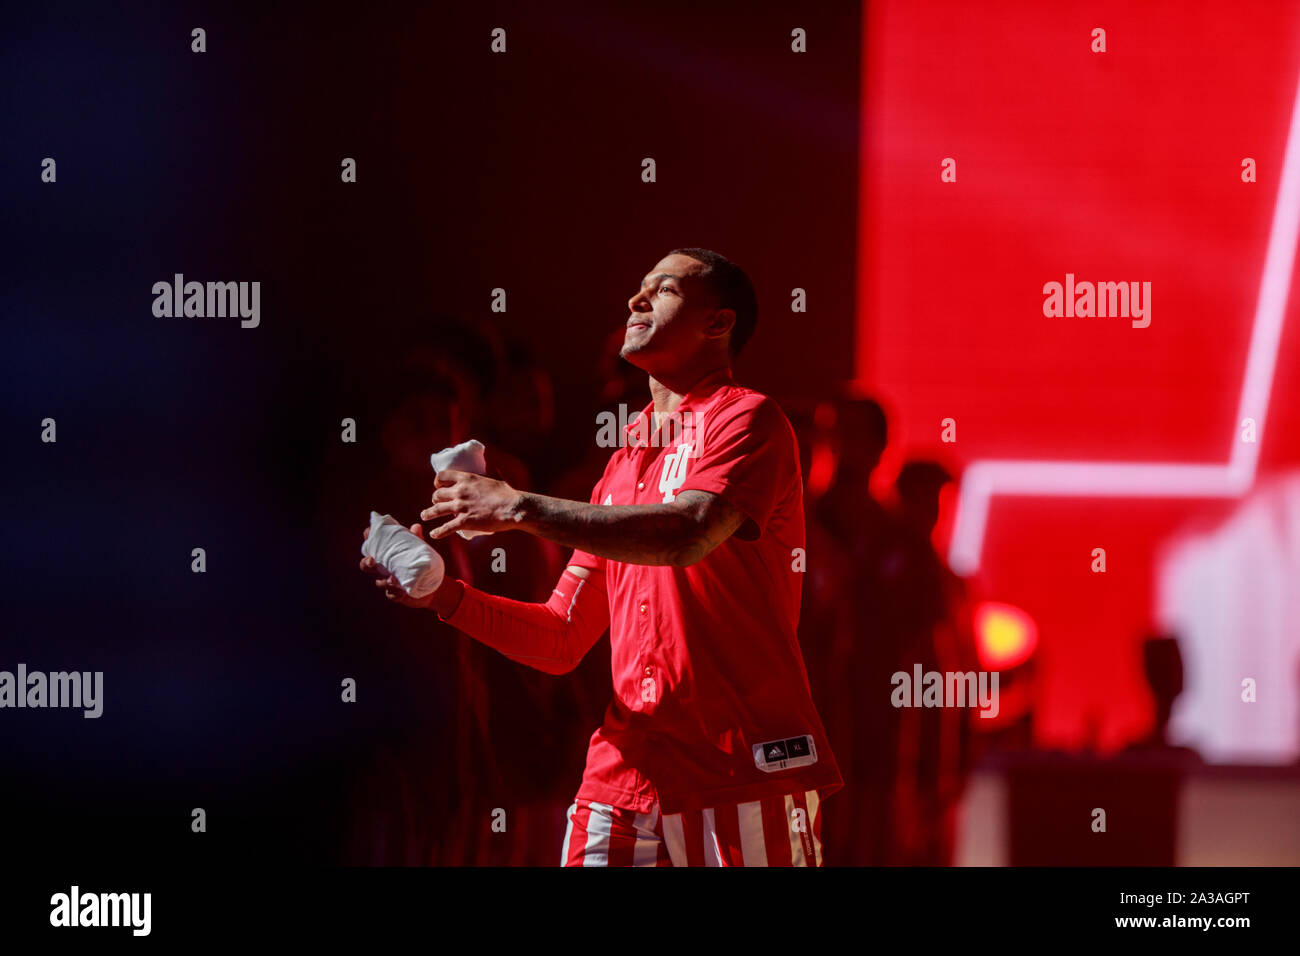 Bloomington, United States. 05th Oct, 2019. Indiana University men's basketball player, Devonte Green on stage during Hoosier Hysteria.The Hoosier Hysteria event officially kicks off the basketball season at Indiana University whose team has won five national division 1 NCAA basketball titles. Credit: SOPA Images Limited/Alamy Live News Stock Photo